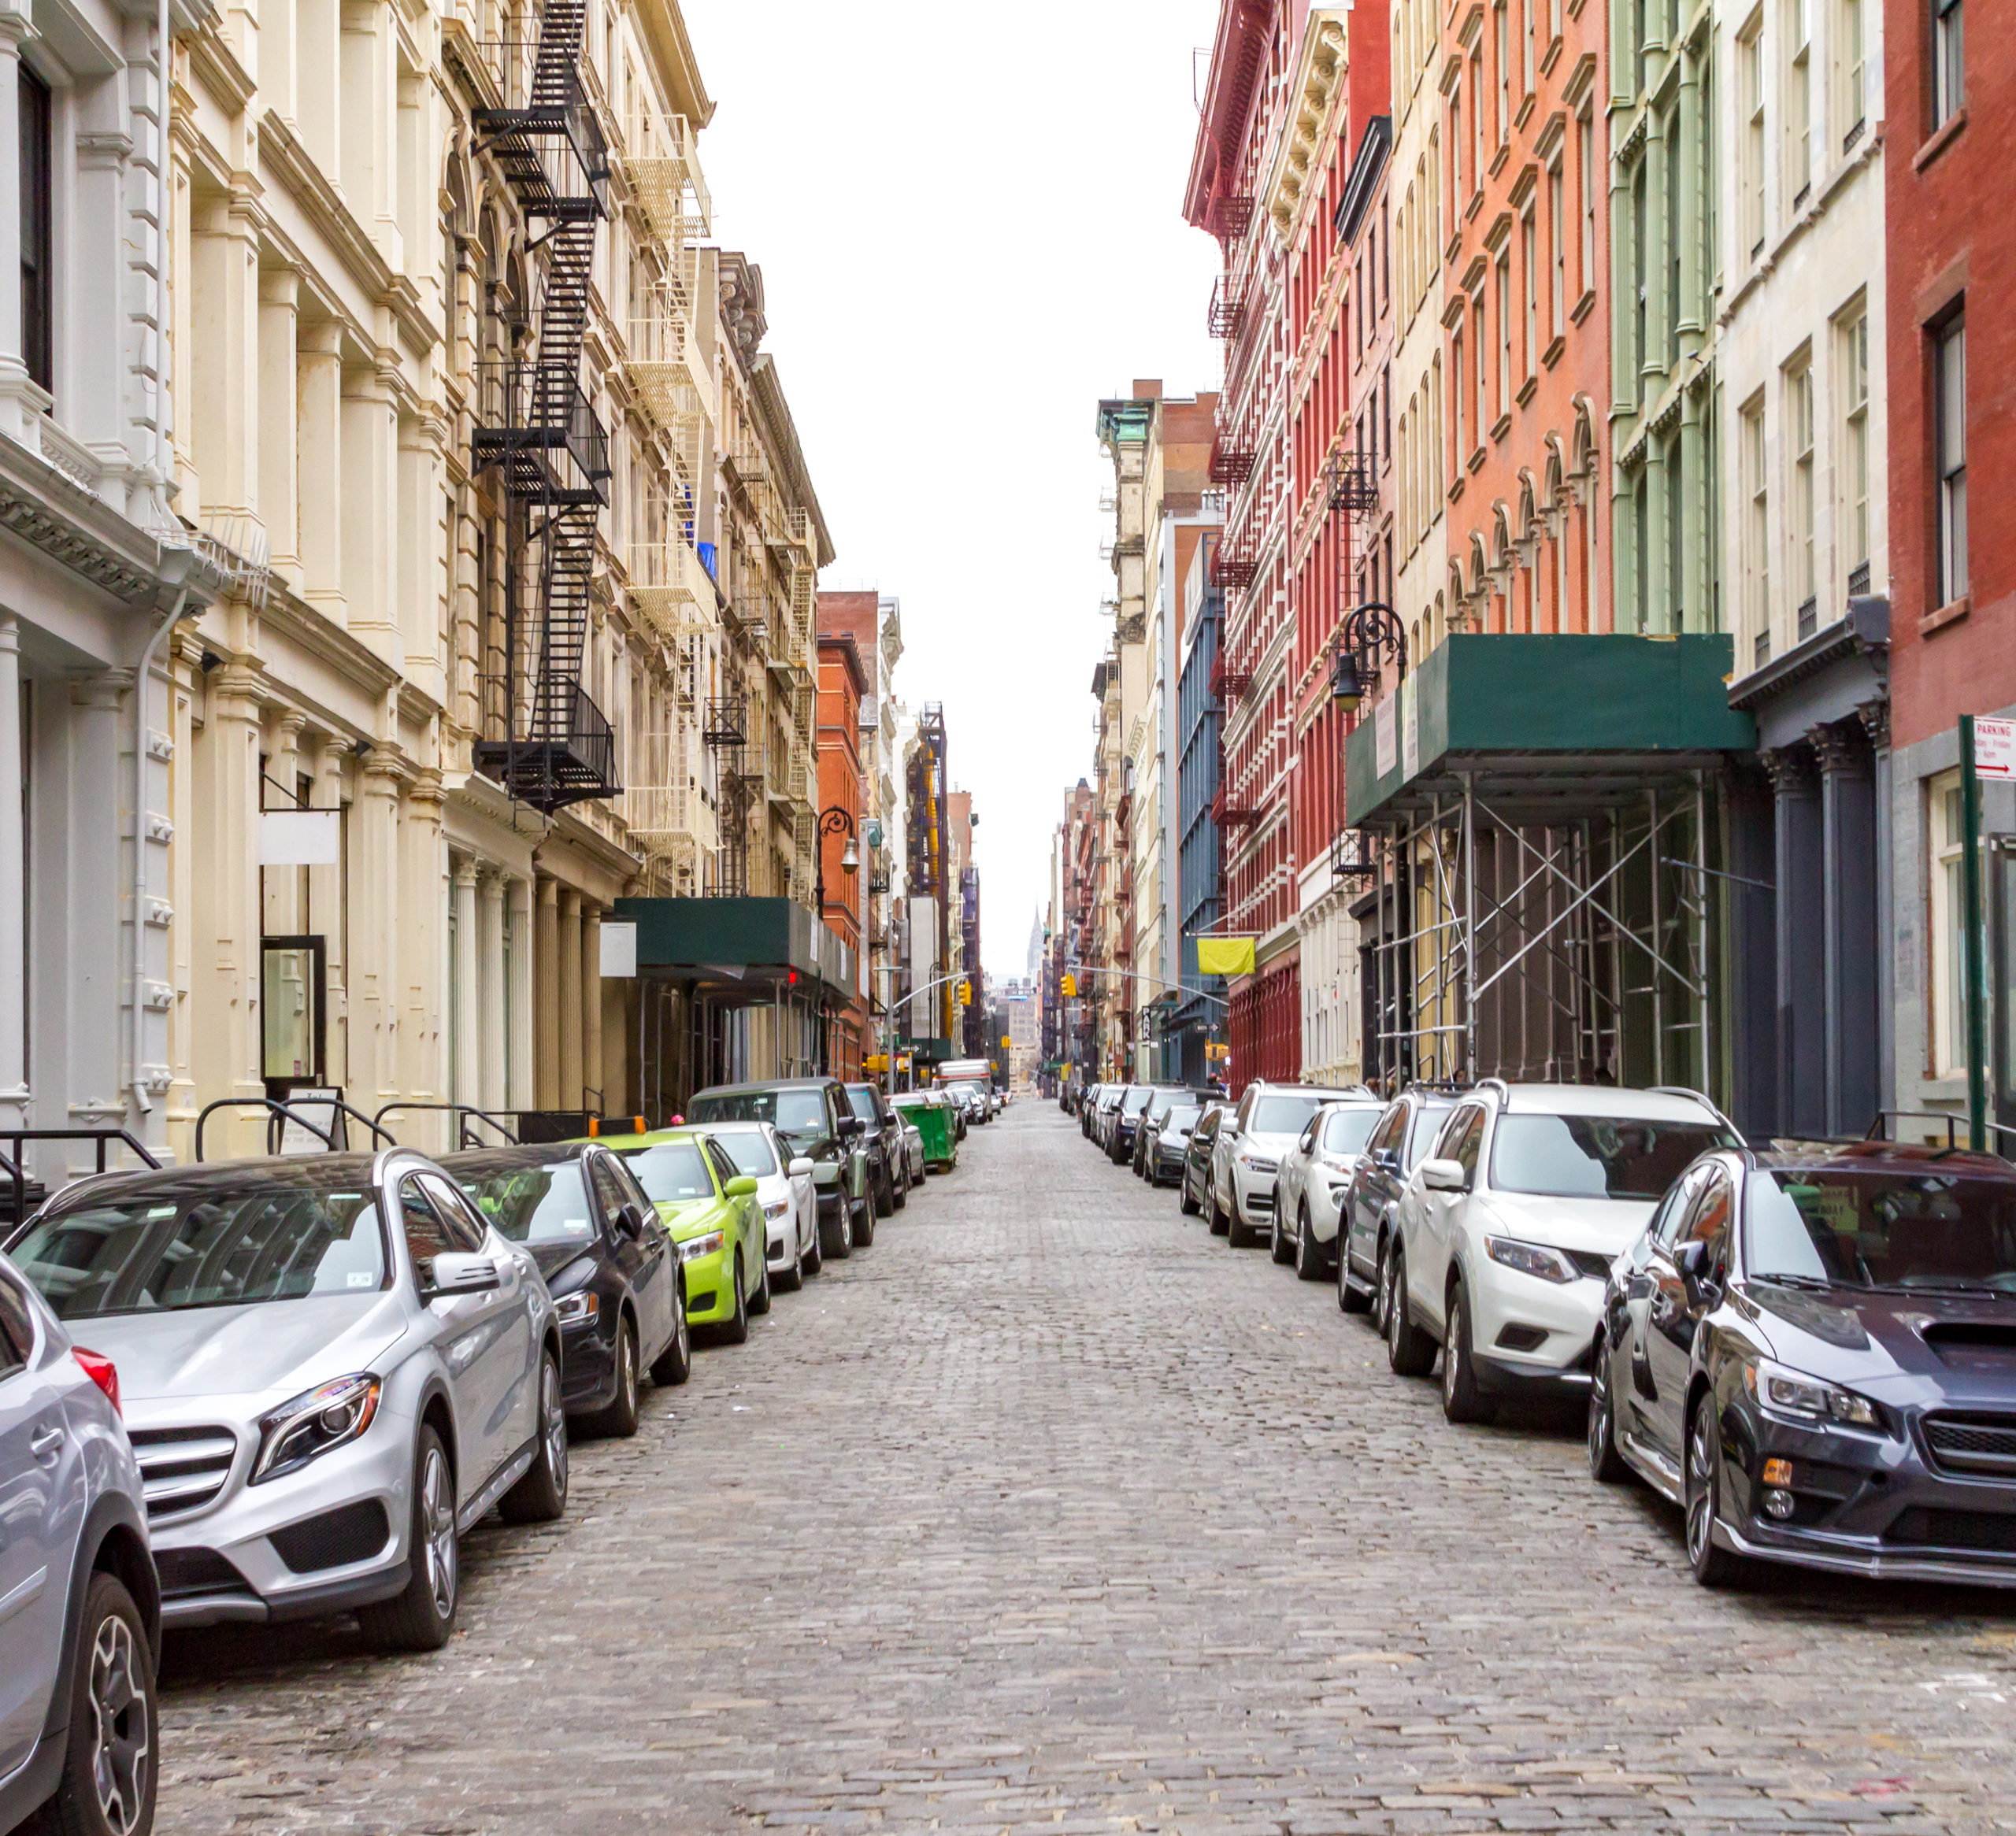 To Tackle Climate Change, Cities Need to Rethink Parking